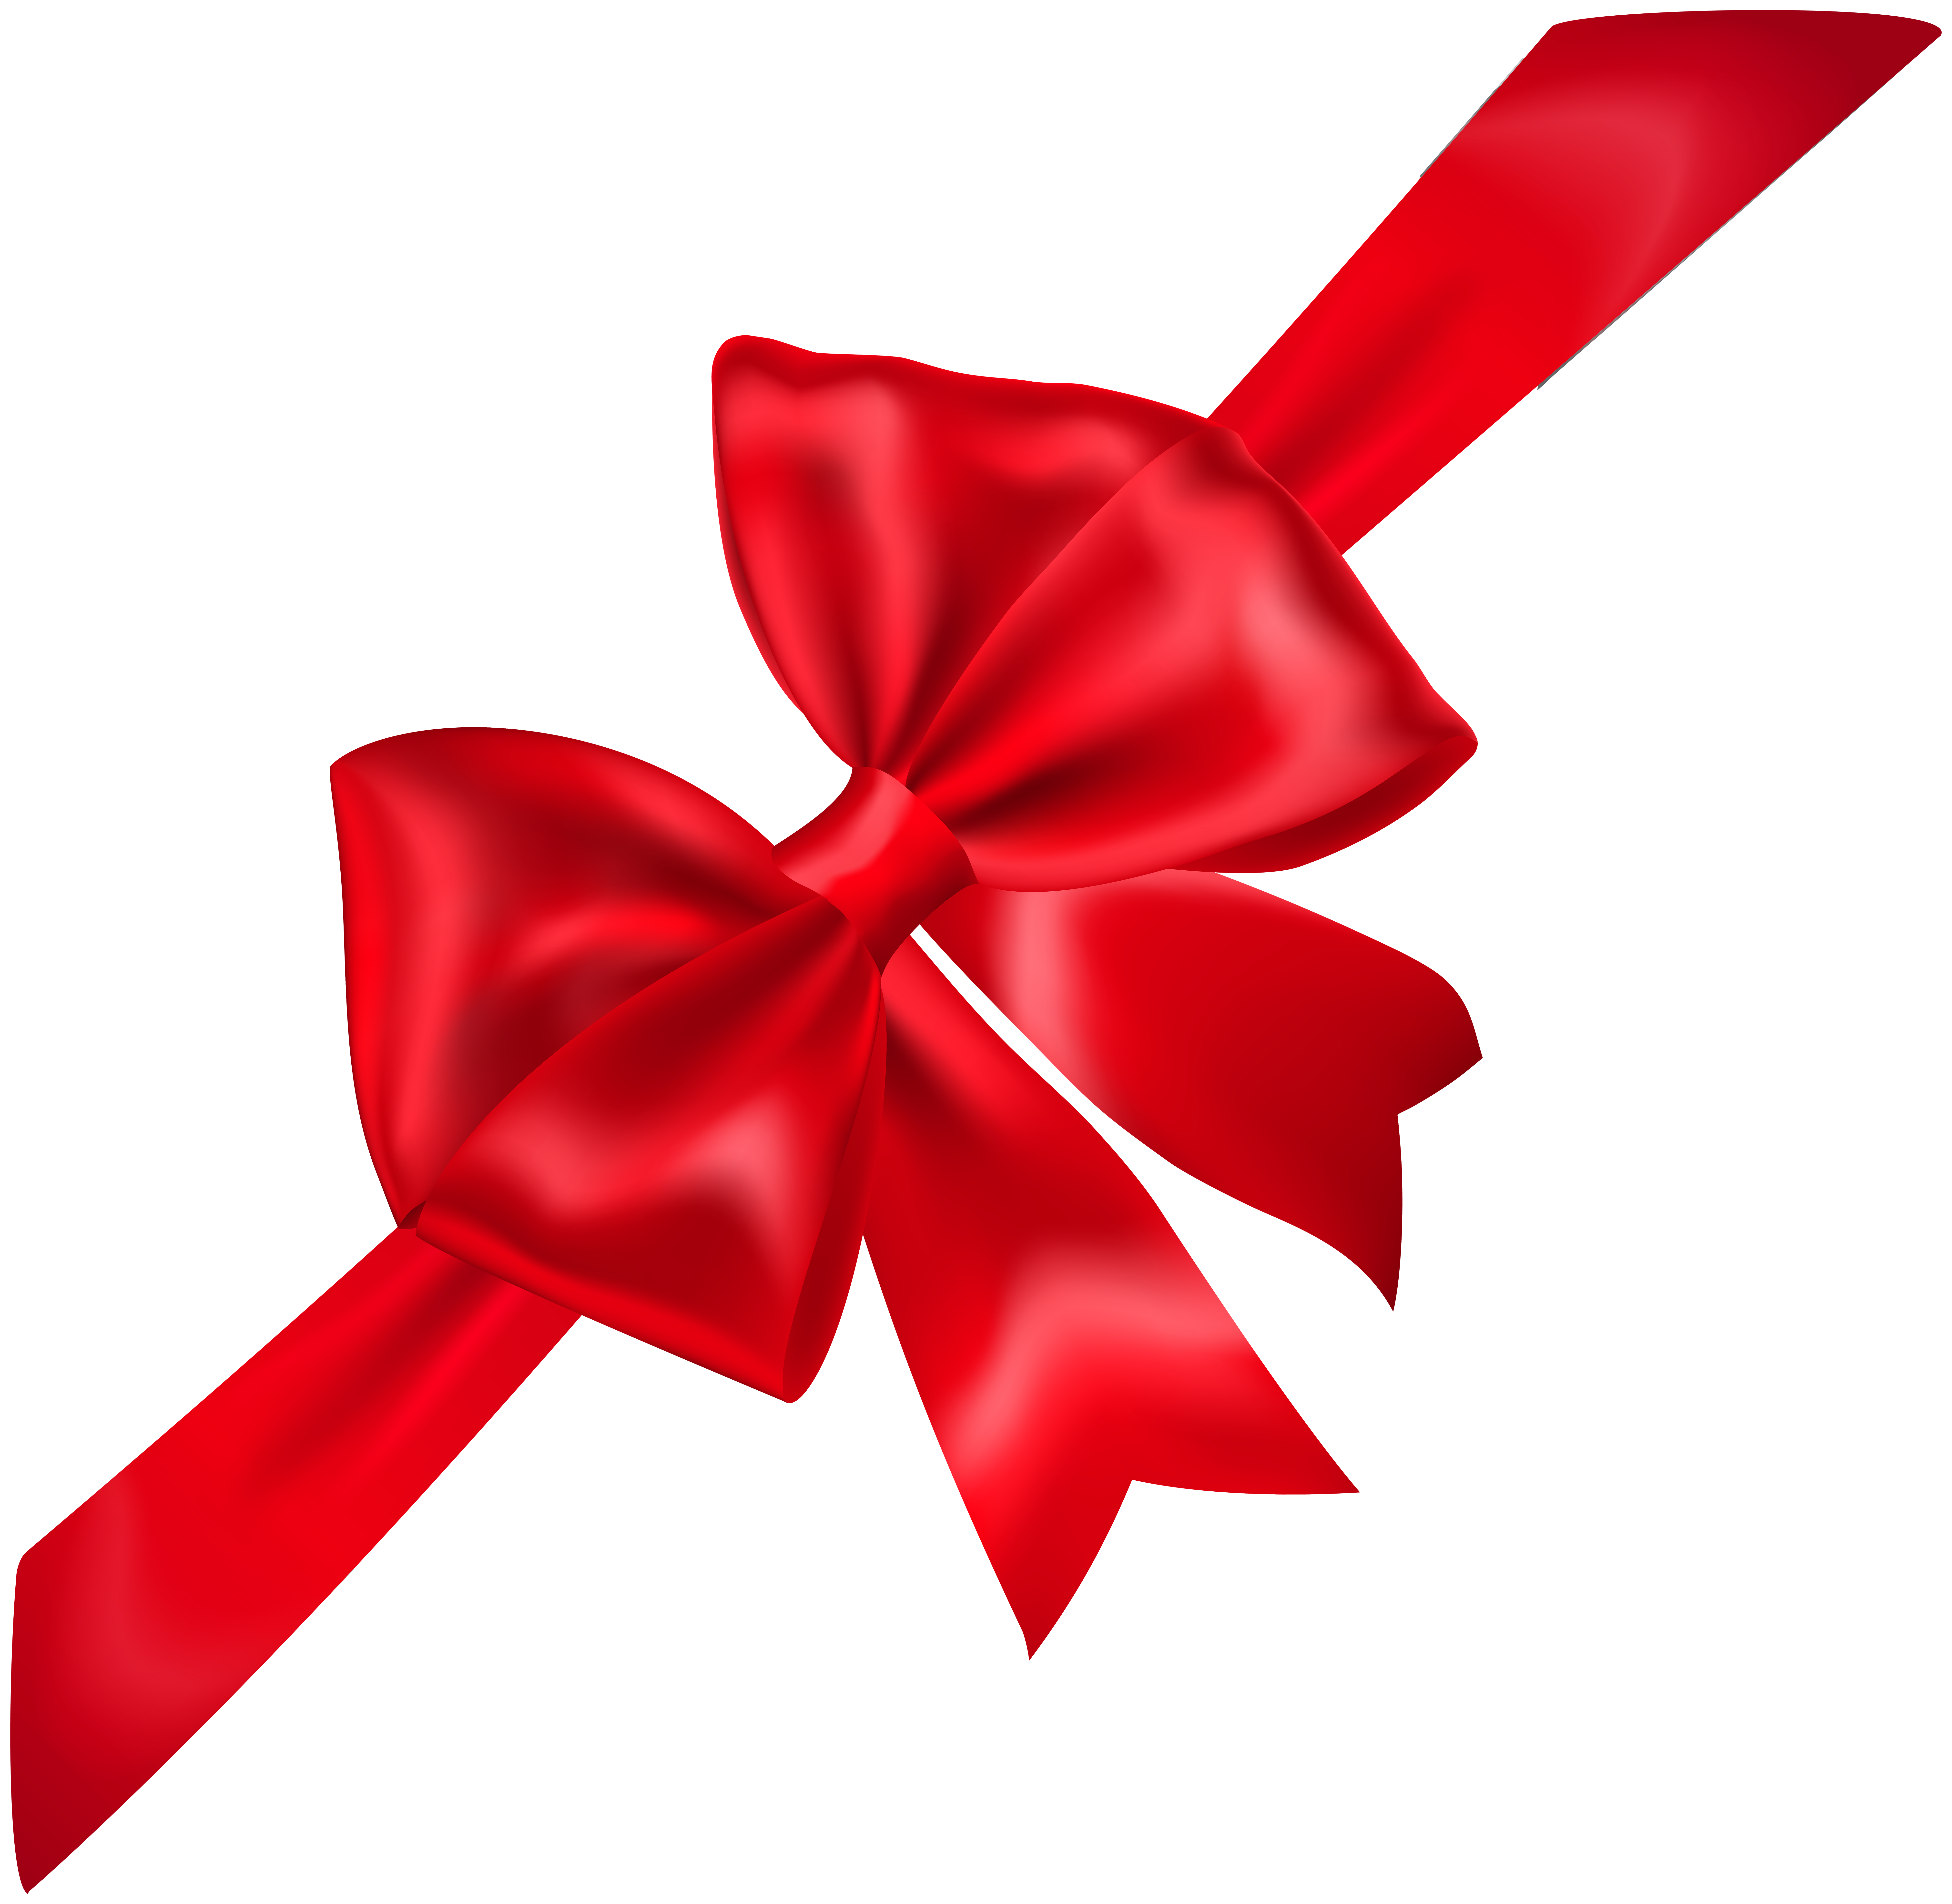 Red Bow Transparent PNG Image​, Red Bow